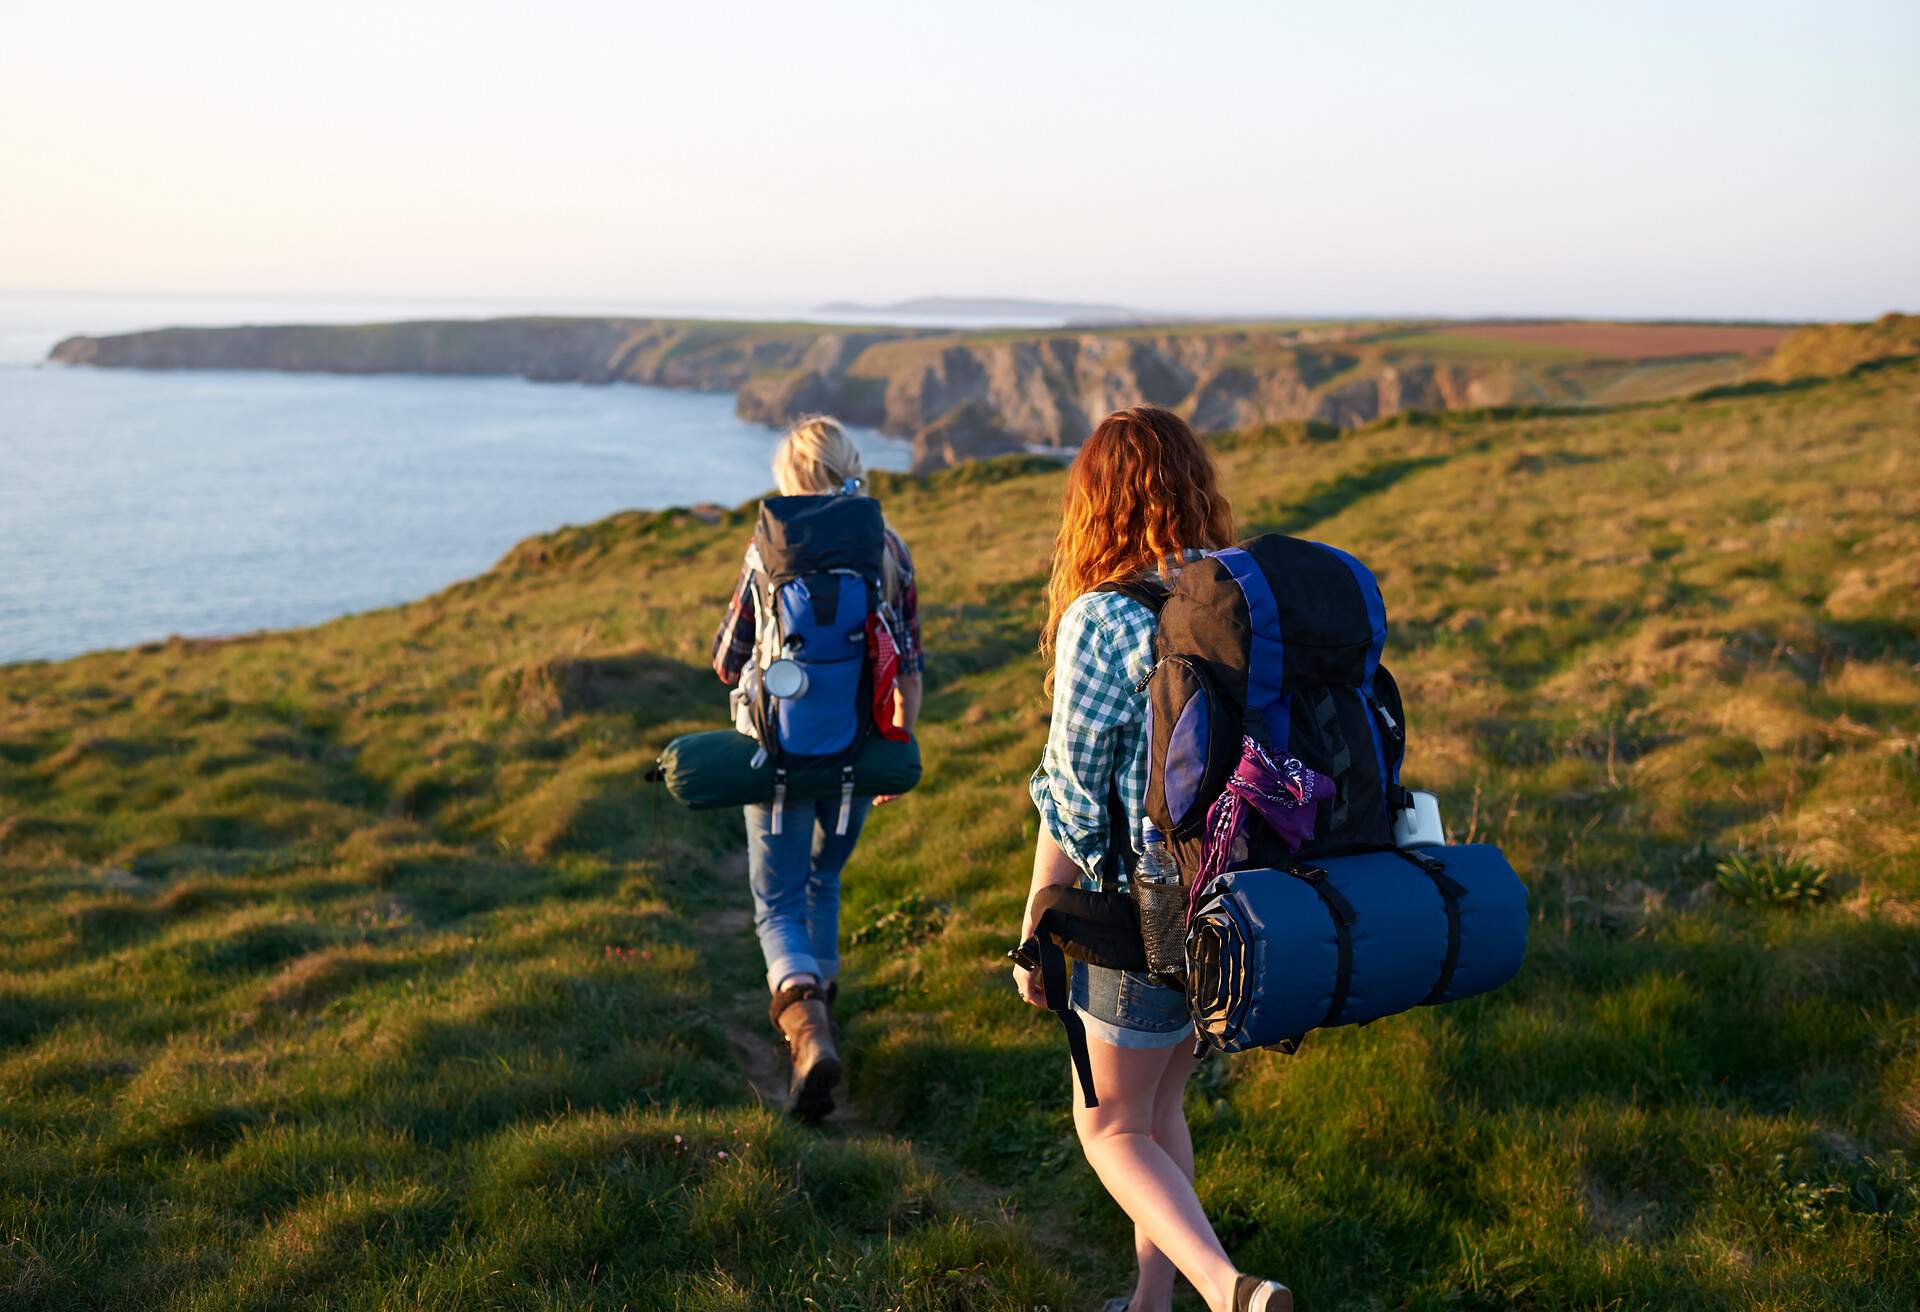 DEST_UK_ENGLAND_THEME_CAMPING_HIKING_PEOPLE_COAST_GettyImages-558833577